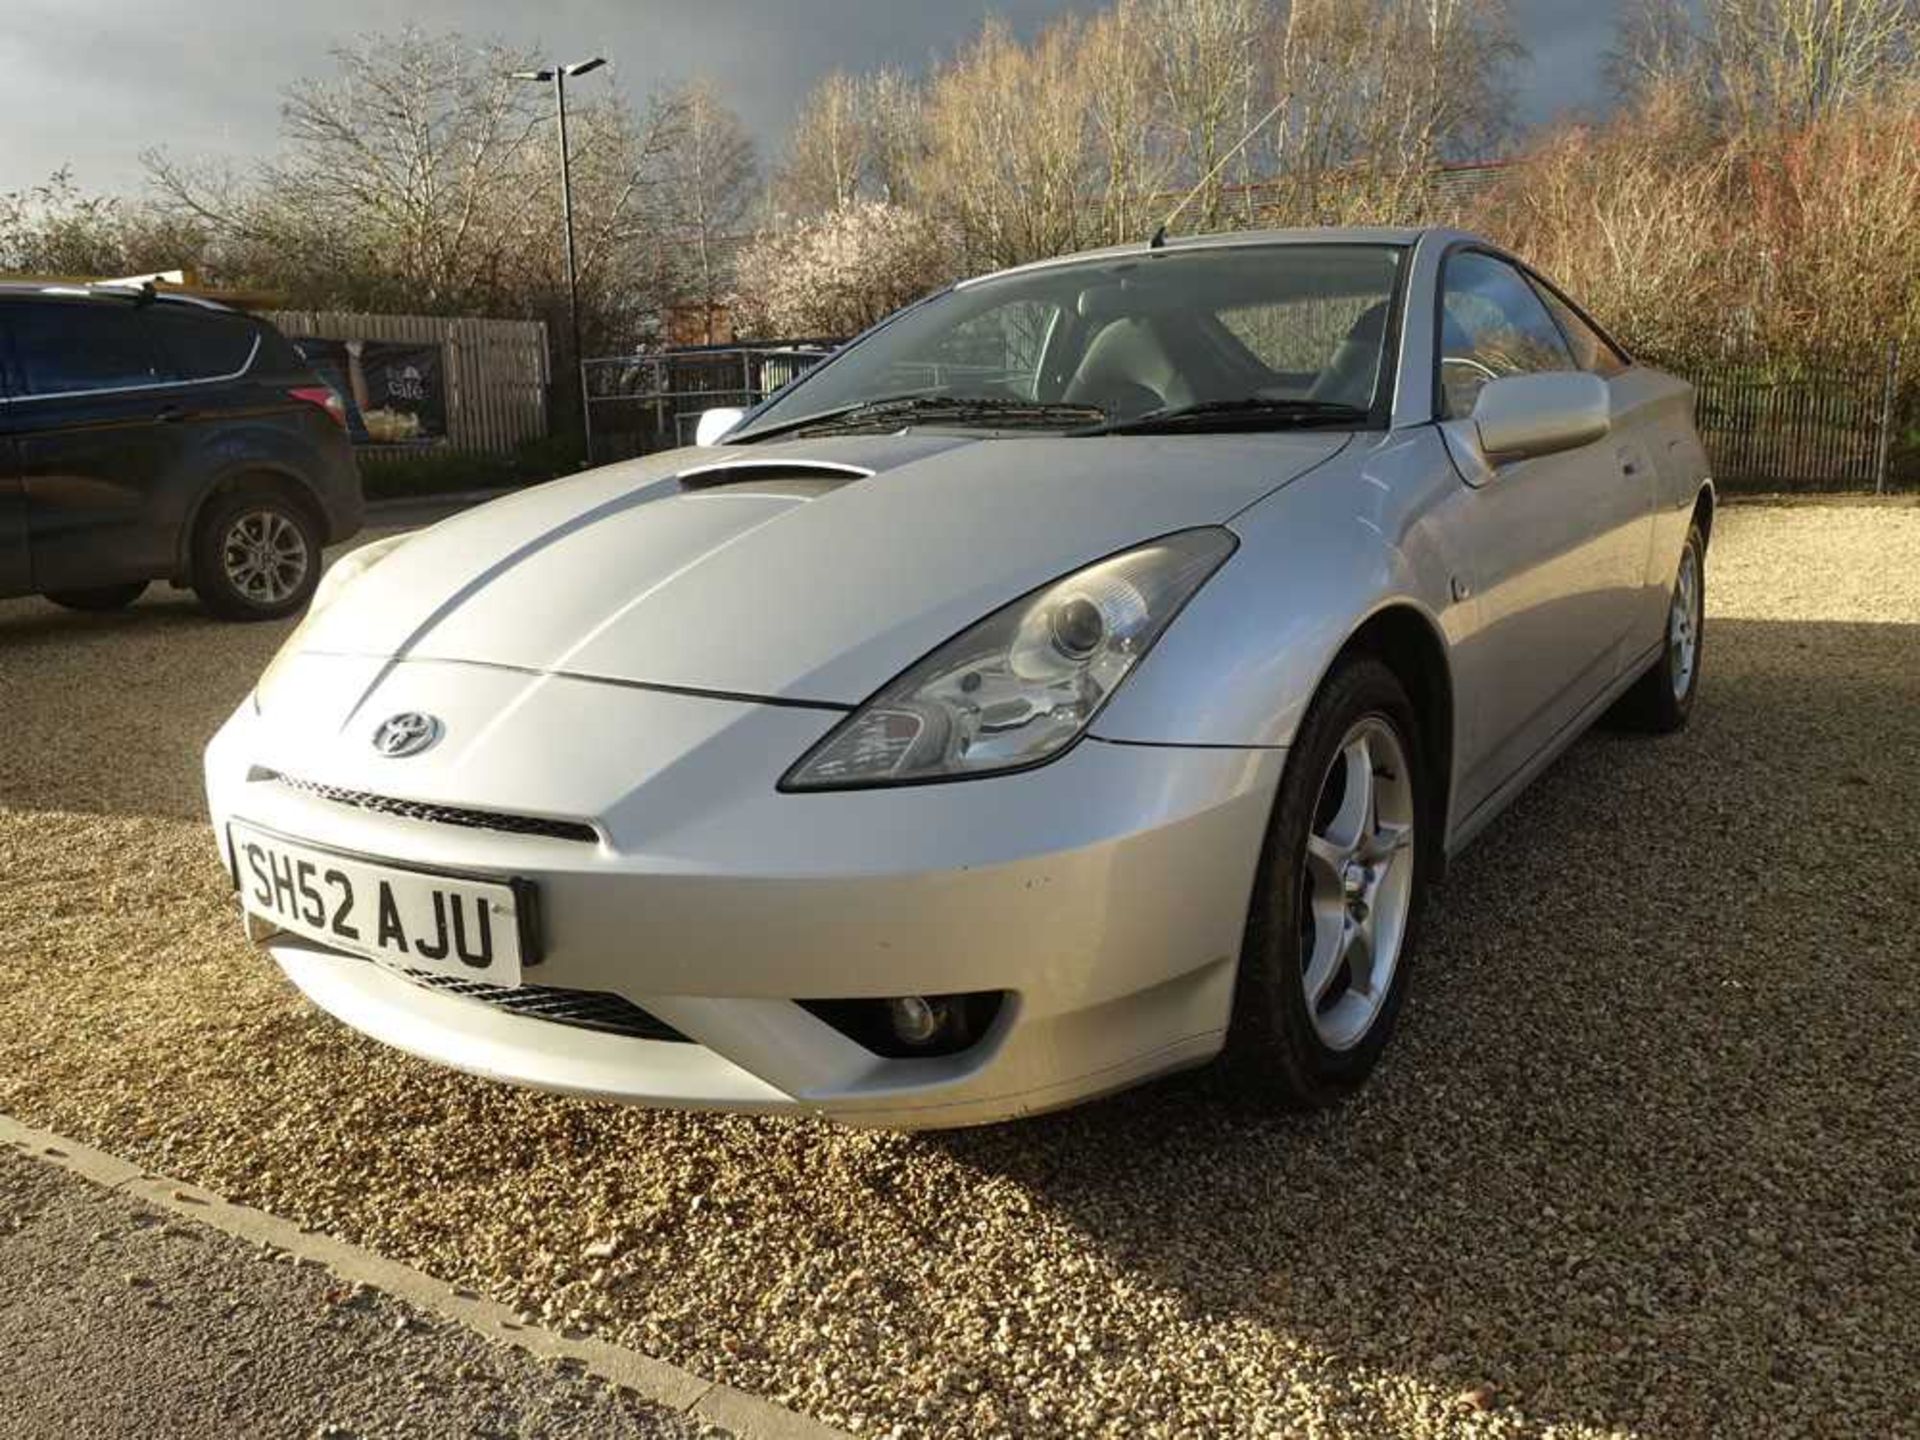 SH52 AJU (2002) Toyota Celica VVTI coupe in silver, petrol, 1794cc, V5 and two keys, 3 former